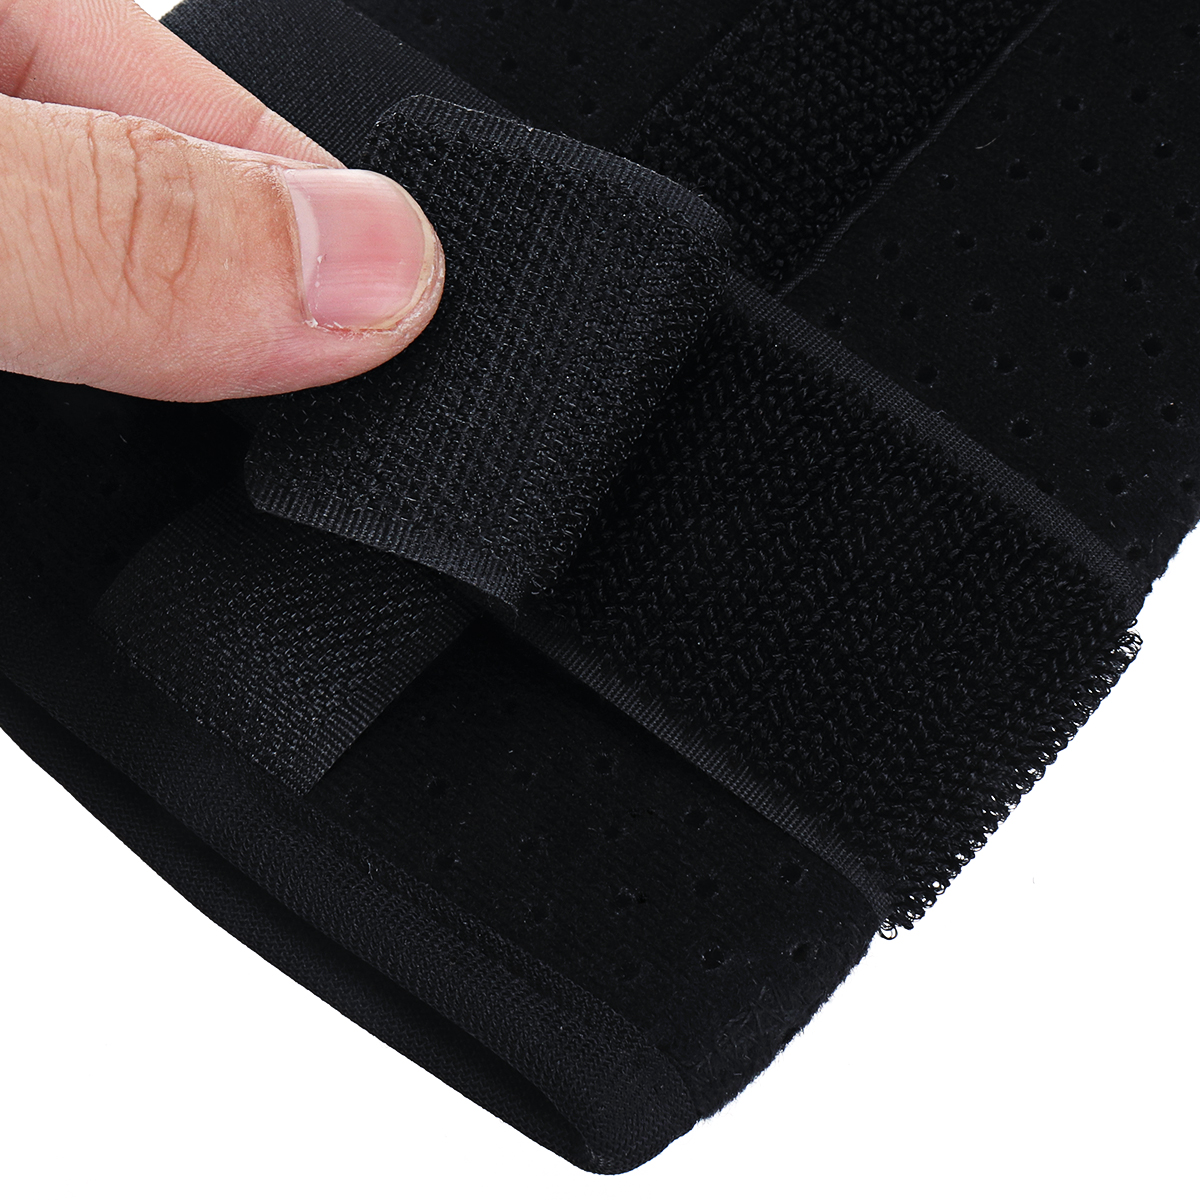 Breathable-Adjustable-Wrist-Support-Wrist-Brace-Wrist-Joint-Fixation-Sprain-Protector-Medical-Protec-1571406-6